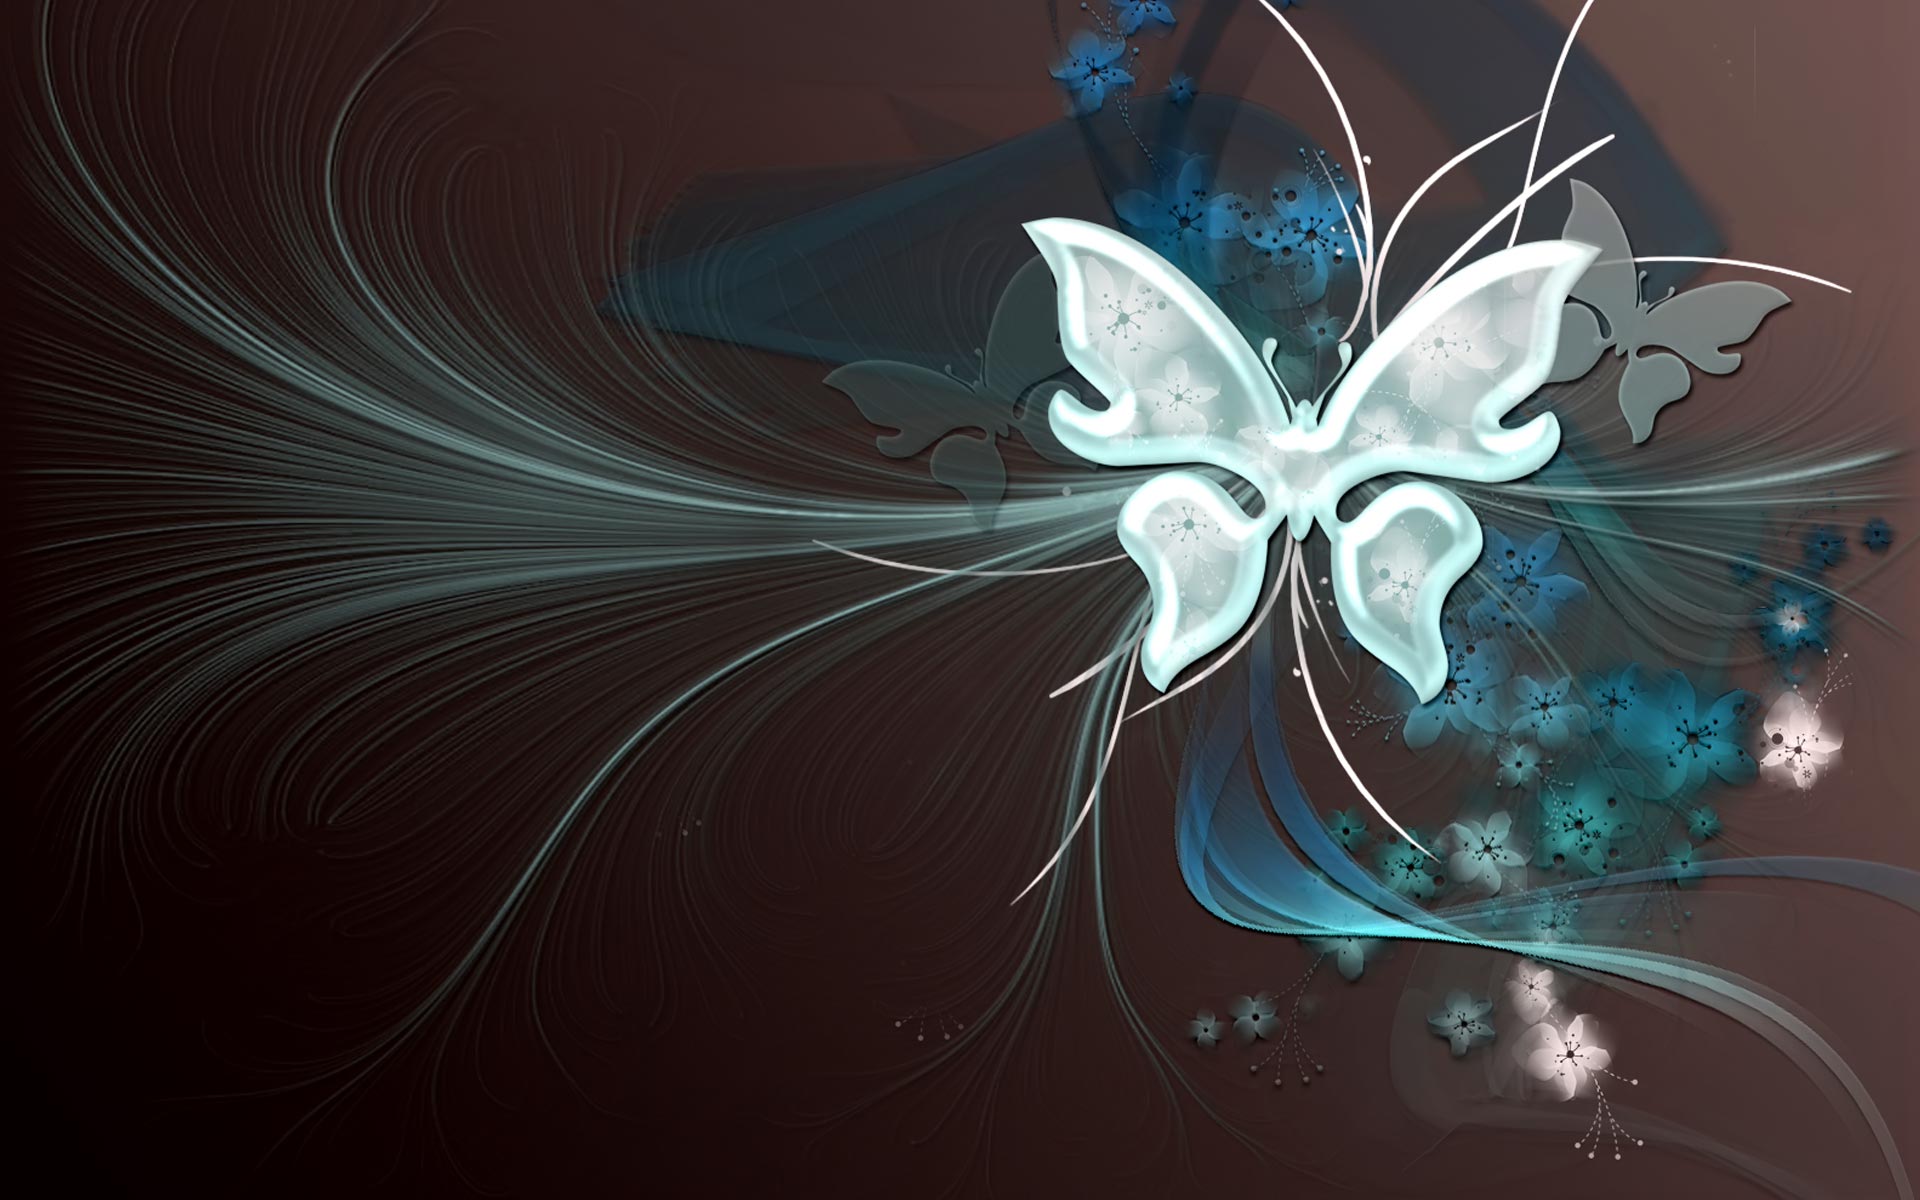  Butterfly vector backgrounds hd Wallpaper and make this wallpaper for